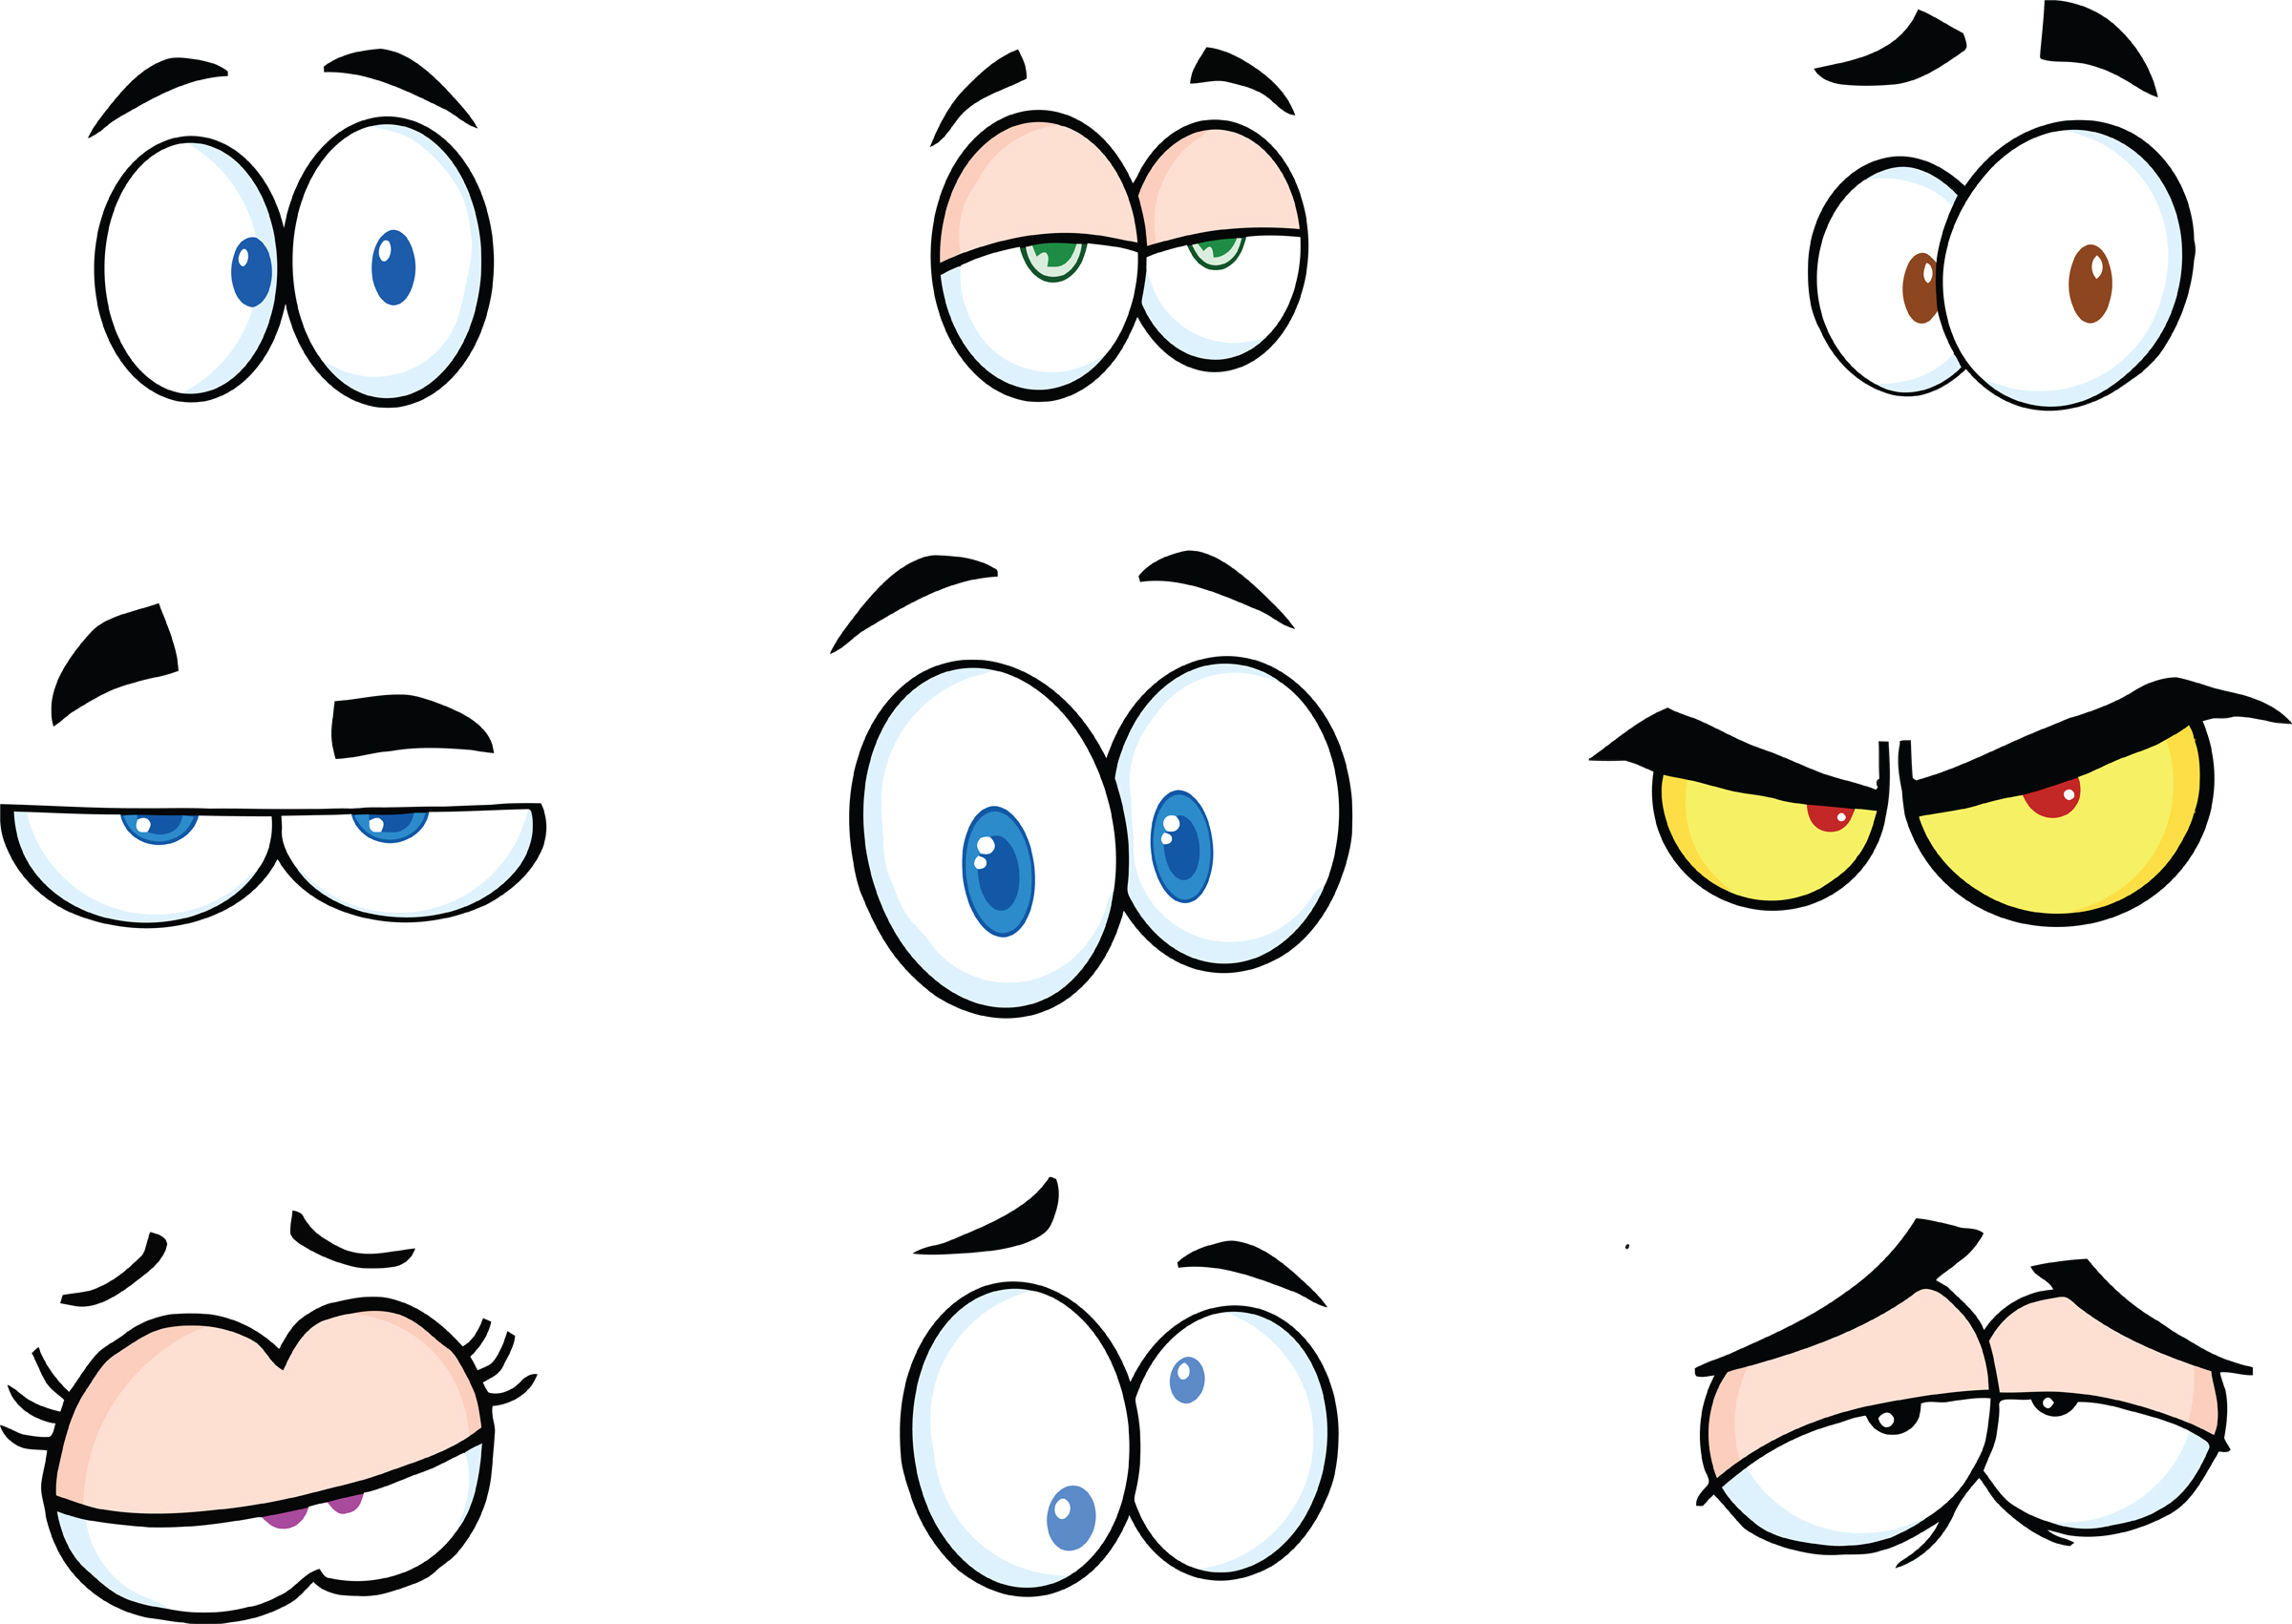 17 Funny Eyes Cartoon Free Cliparts That You Can Download To You